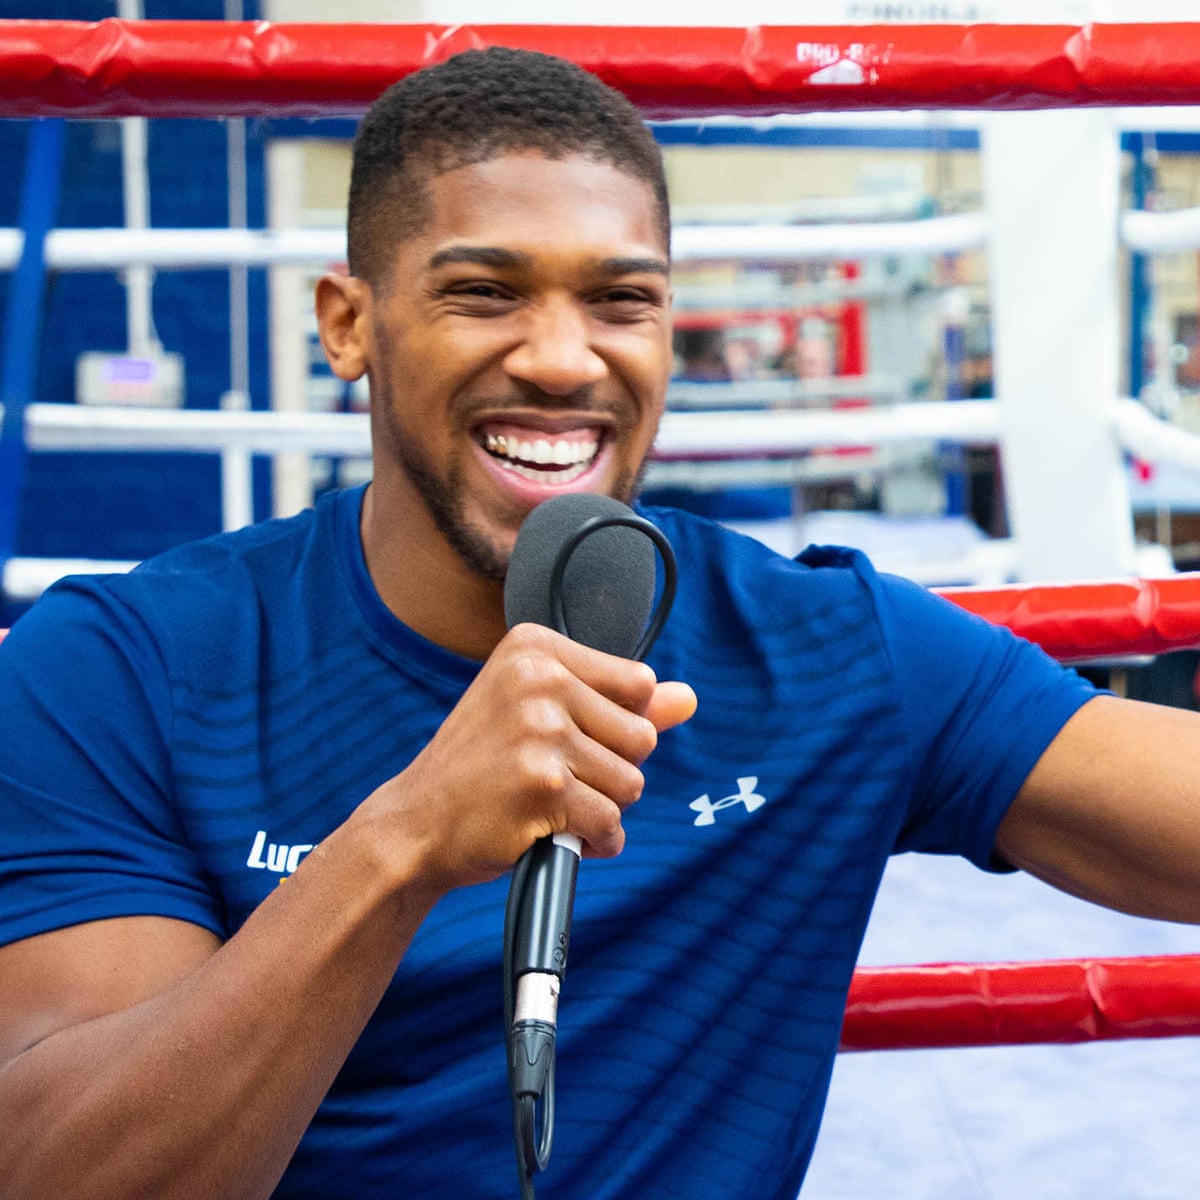 Anthony Joshua Blasts Deontay Wilder, Says He Is Not an Elite Fighter